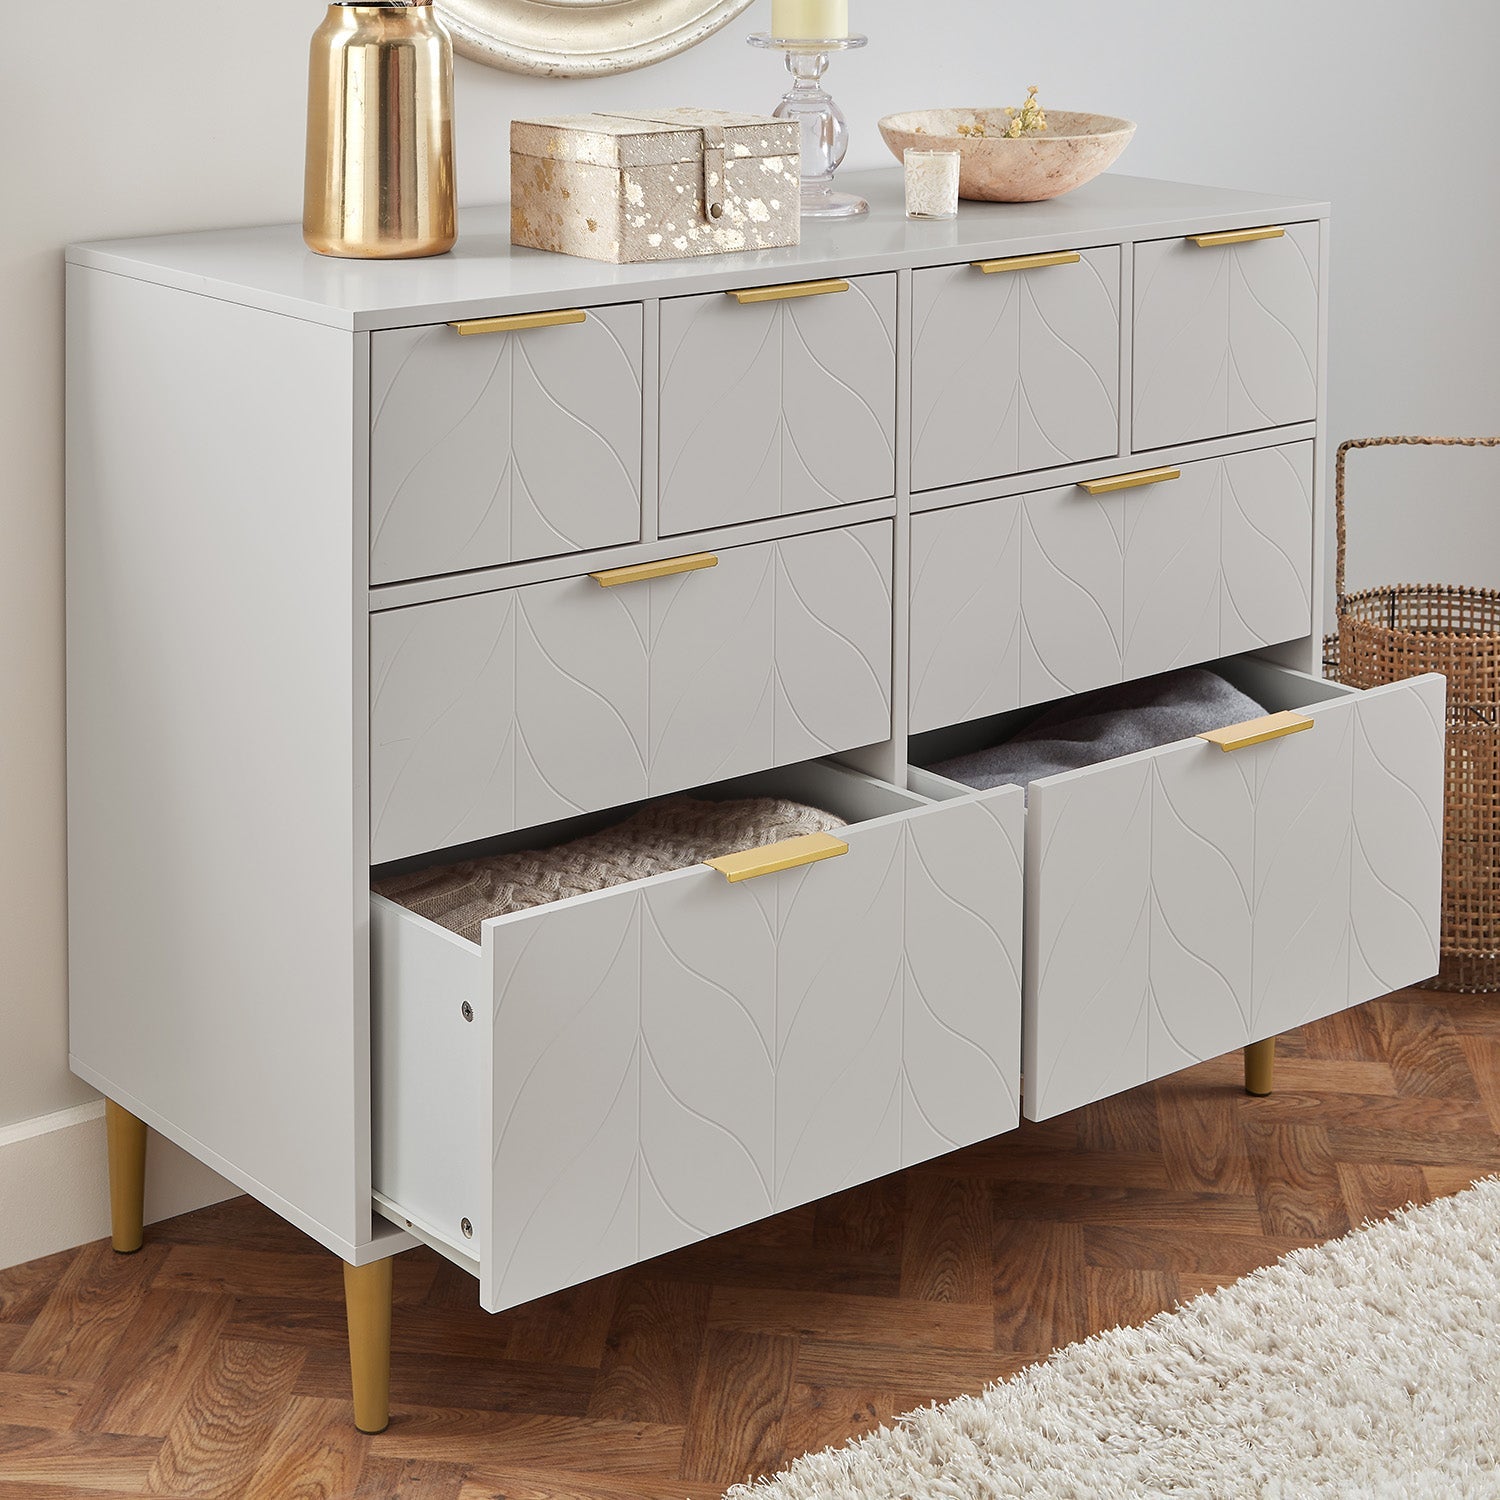 Gloria 3 piece bedroom furniture set - 4 over 4 chest of drawers - grey - Laura James